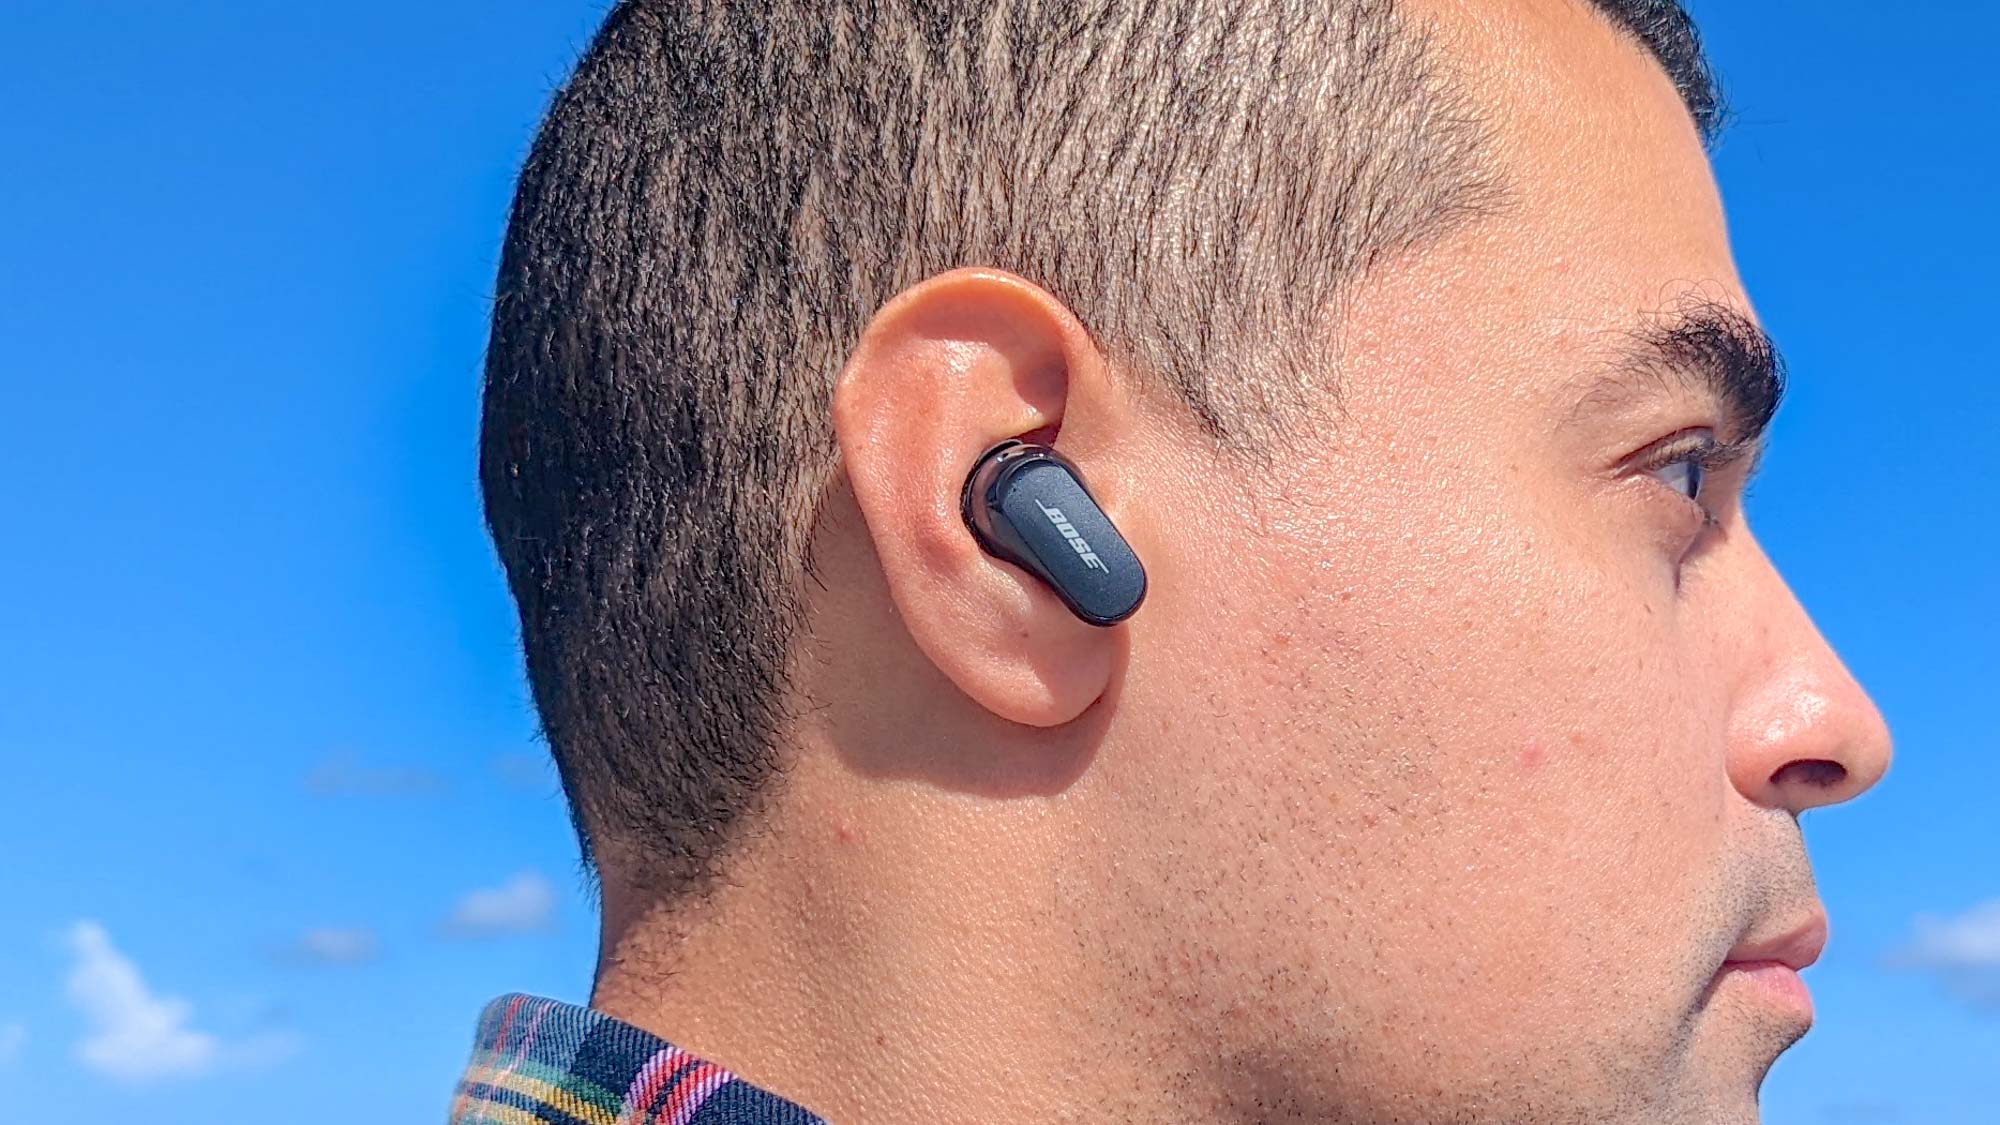 BOSE QUIET COMFORT EARBUDS II 使用僅か｜イヤフォン www.smecleveland.com